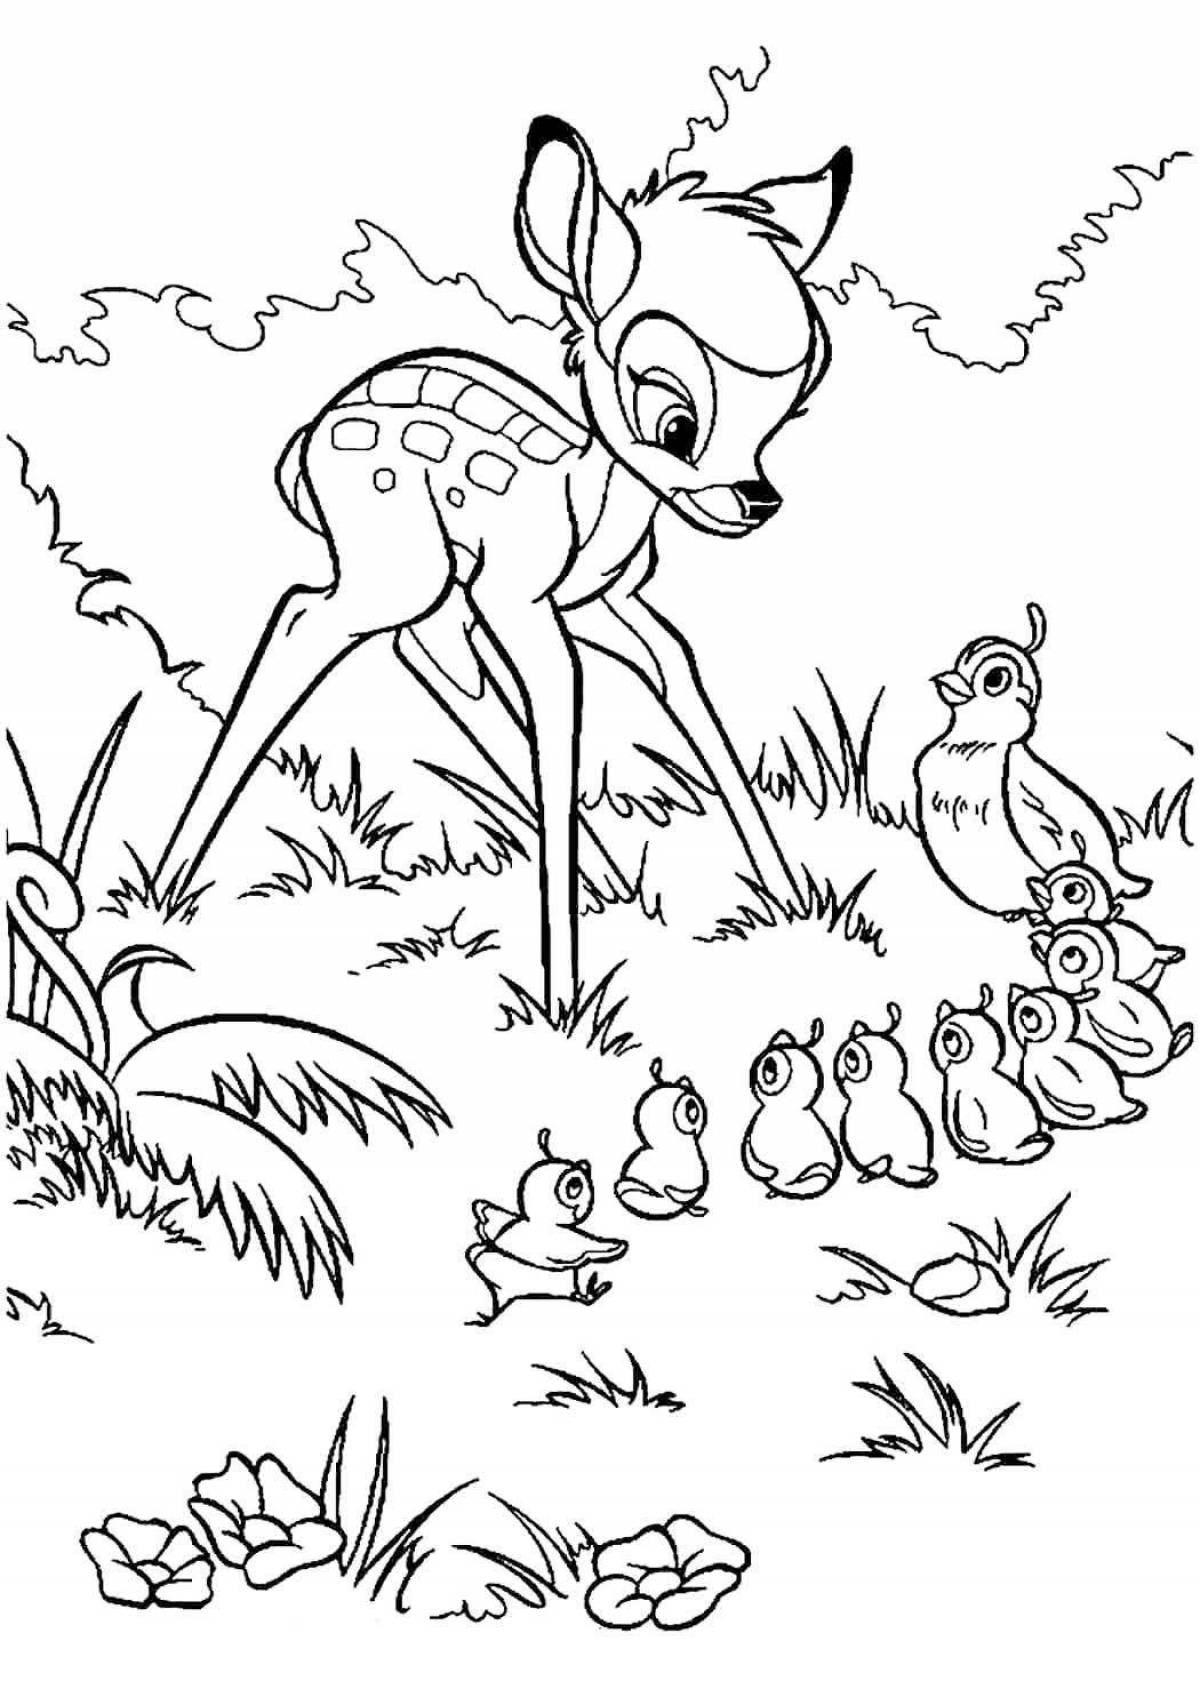 Incredible bambi coloring book for kids 3-4 years old